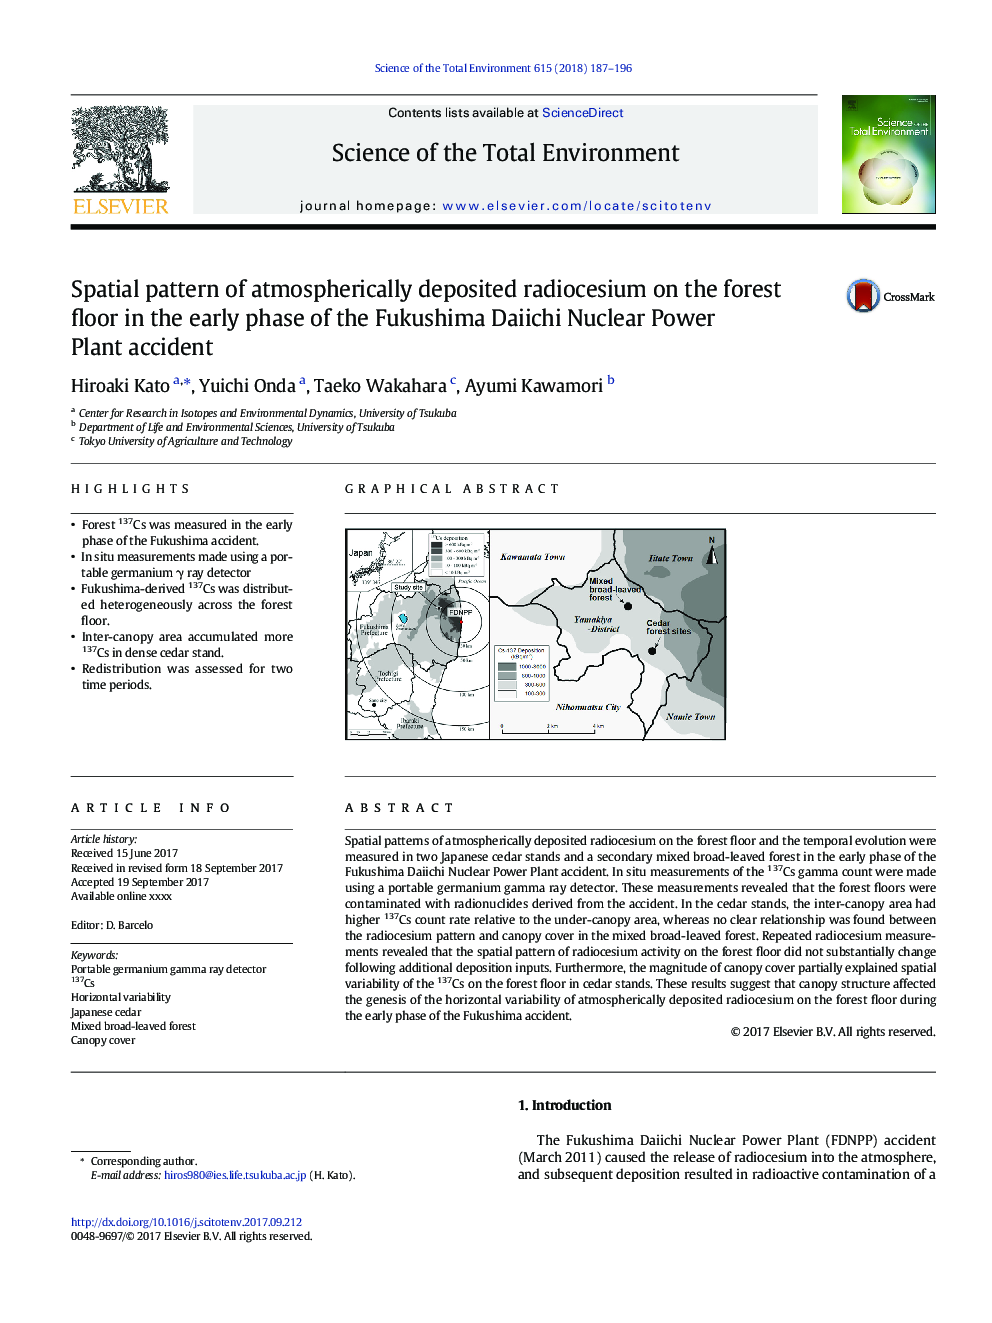 Spatial pattern of atmospherically deposited radiocesium on the forest floor in the early phase of the Fukushima Daiichi Nuclear Power Plant accident